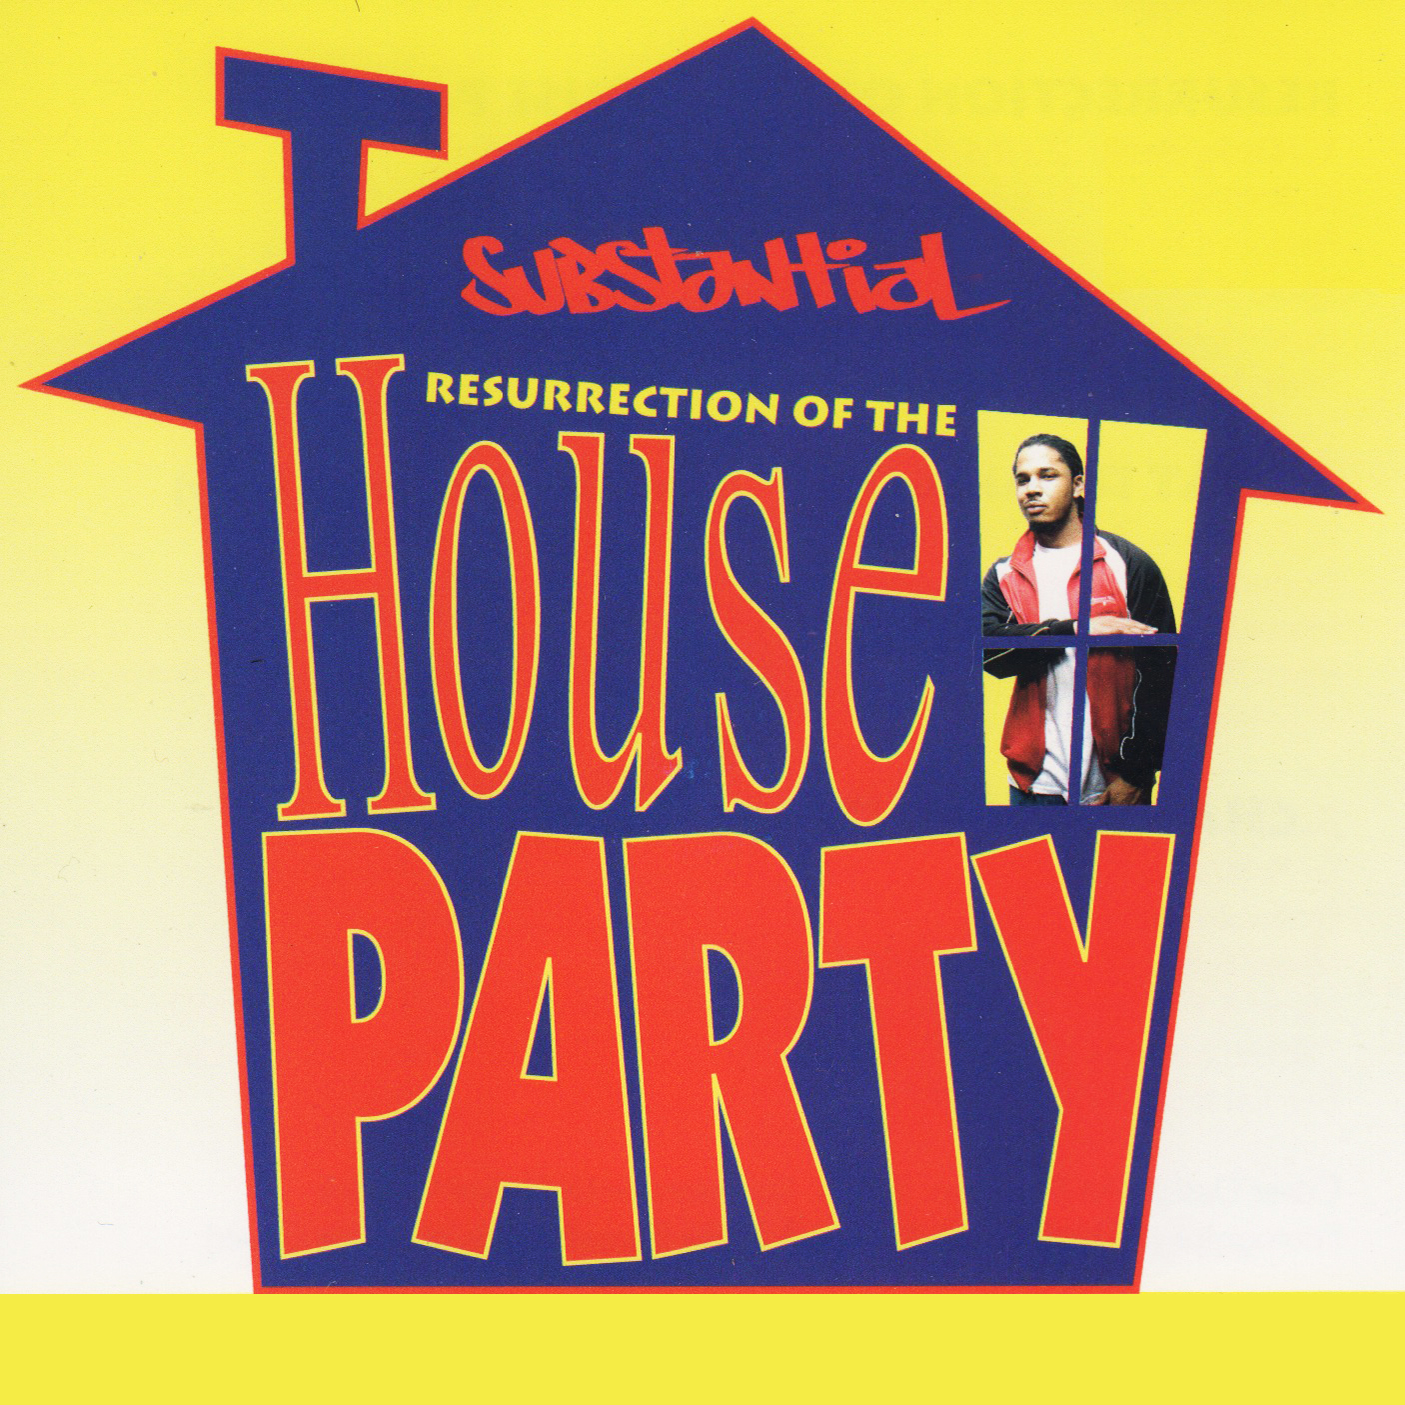 Resurrection of the House Party (Instrumental)